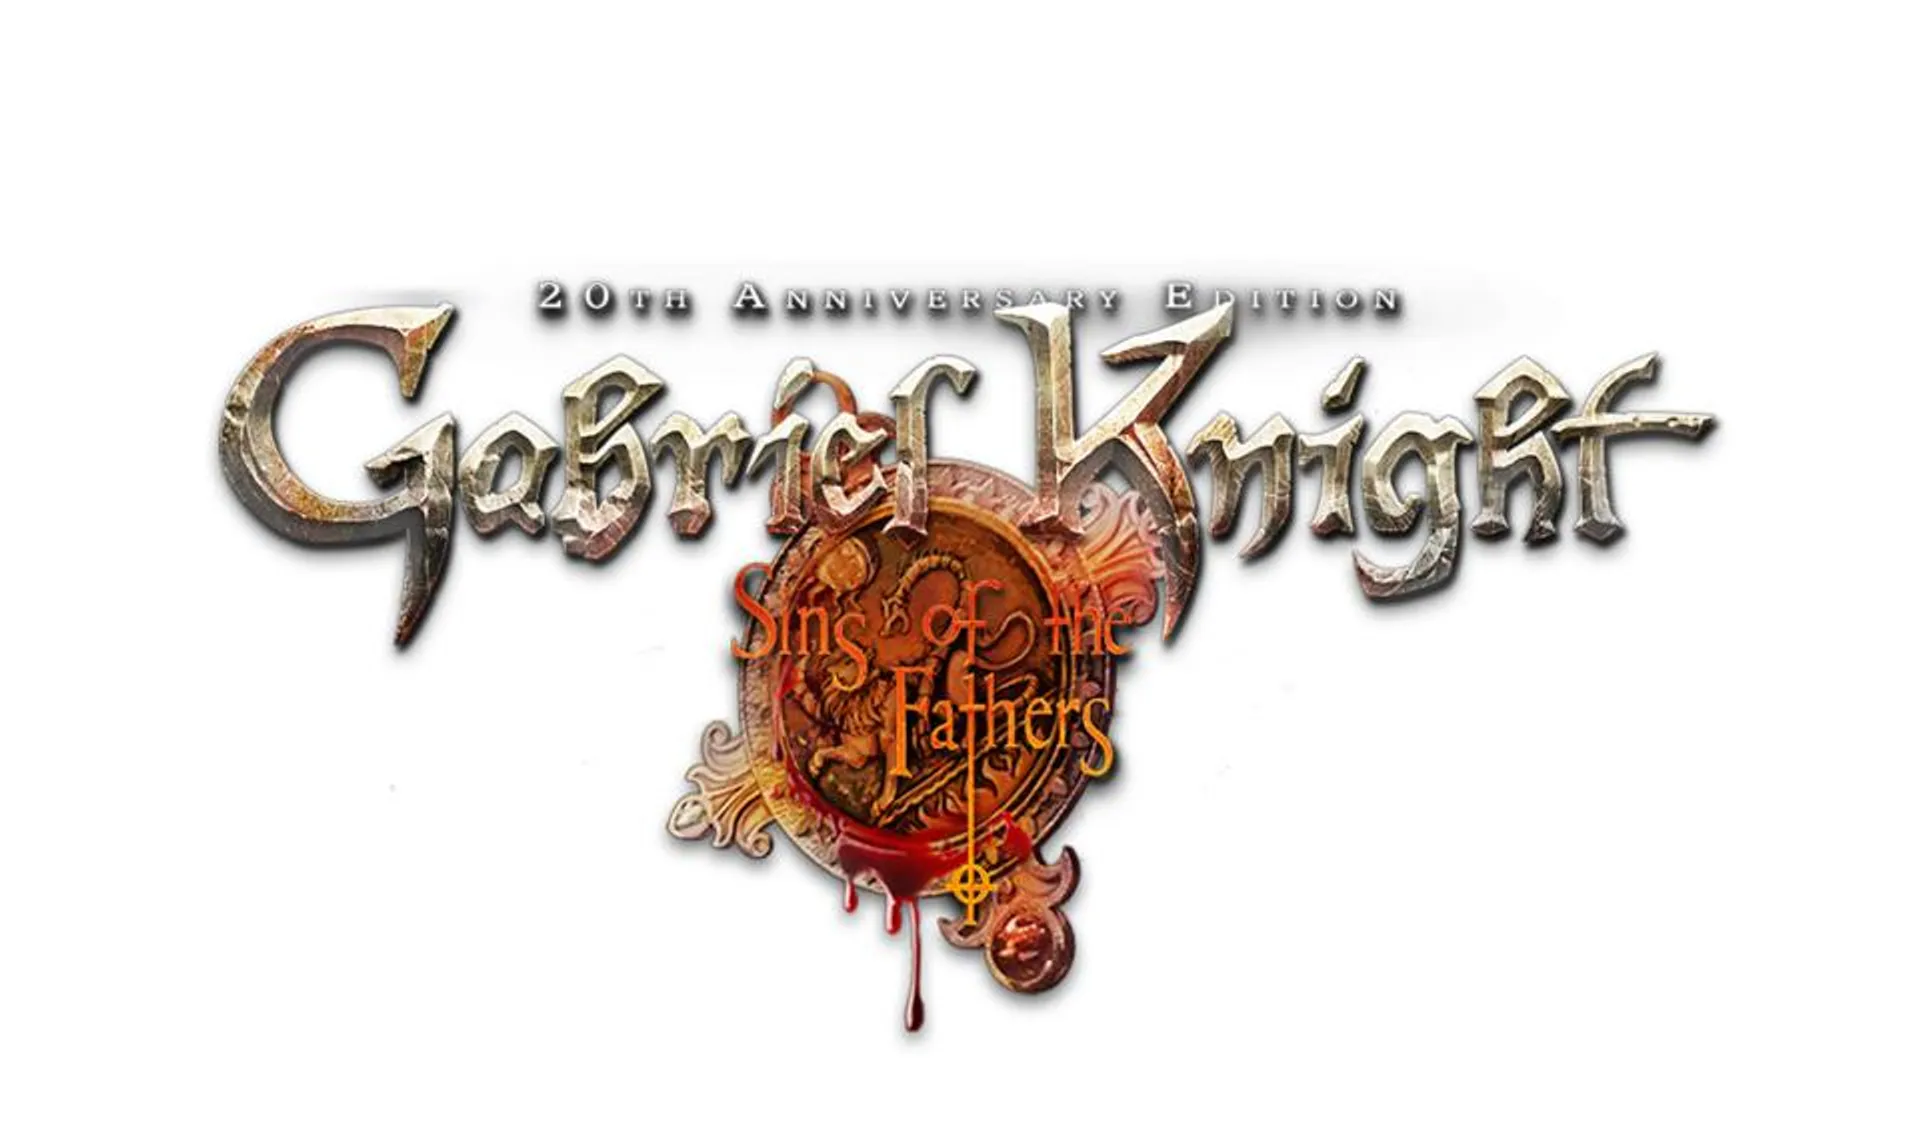 Gabriel Knight: Sins of the Fathers – 20th Anniversary Edition